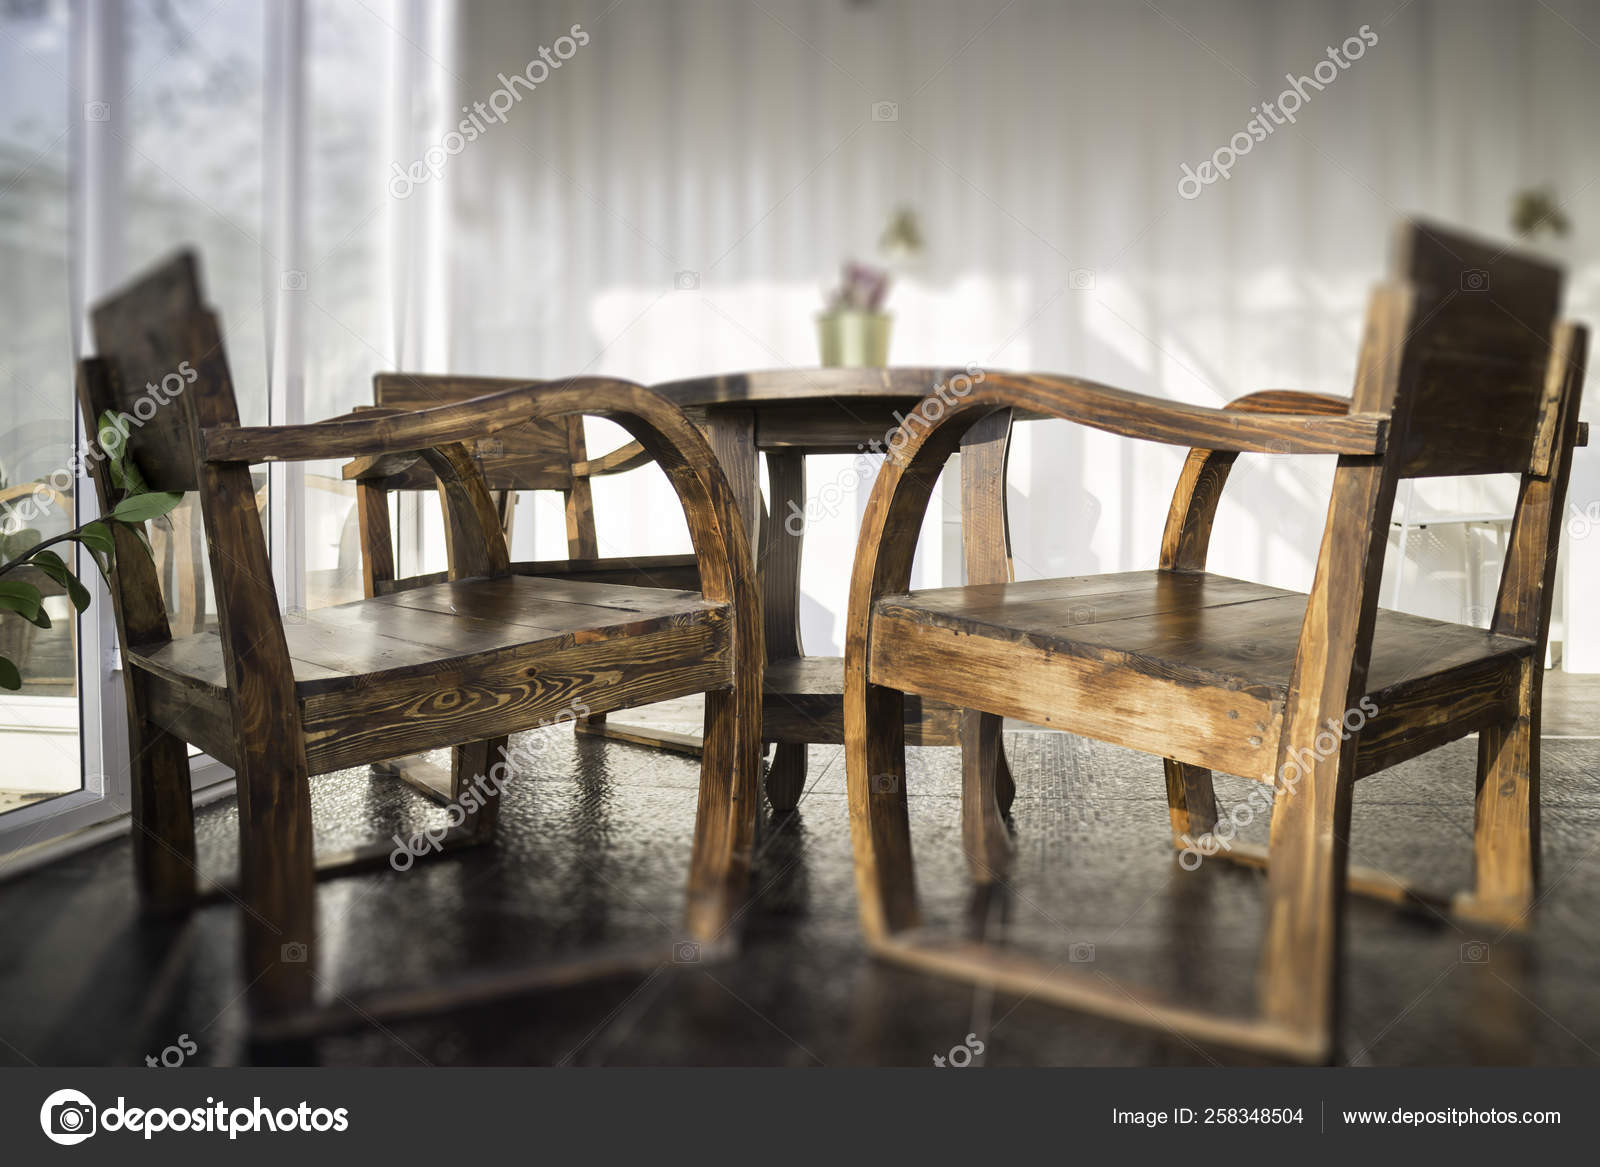 Cargo Container Cafe With Wooden Furniture Set Stock Photo